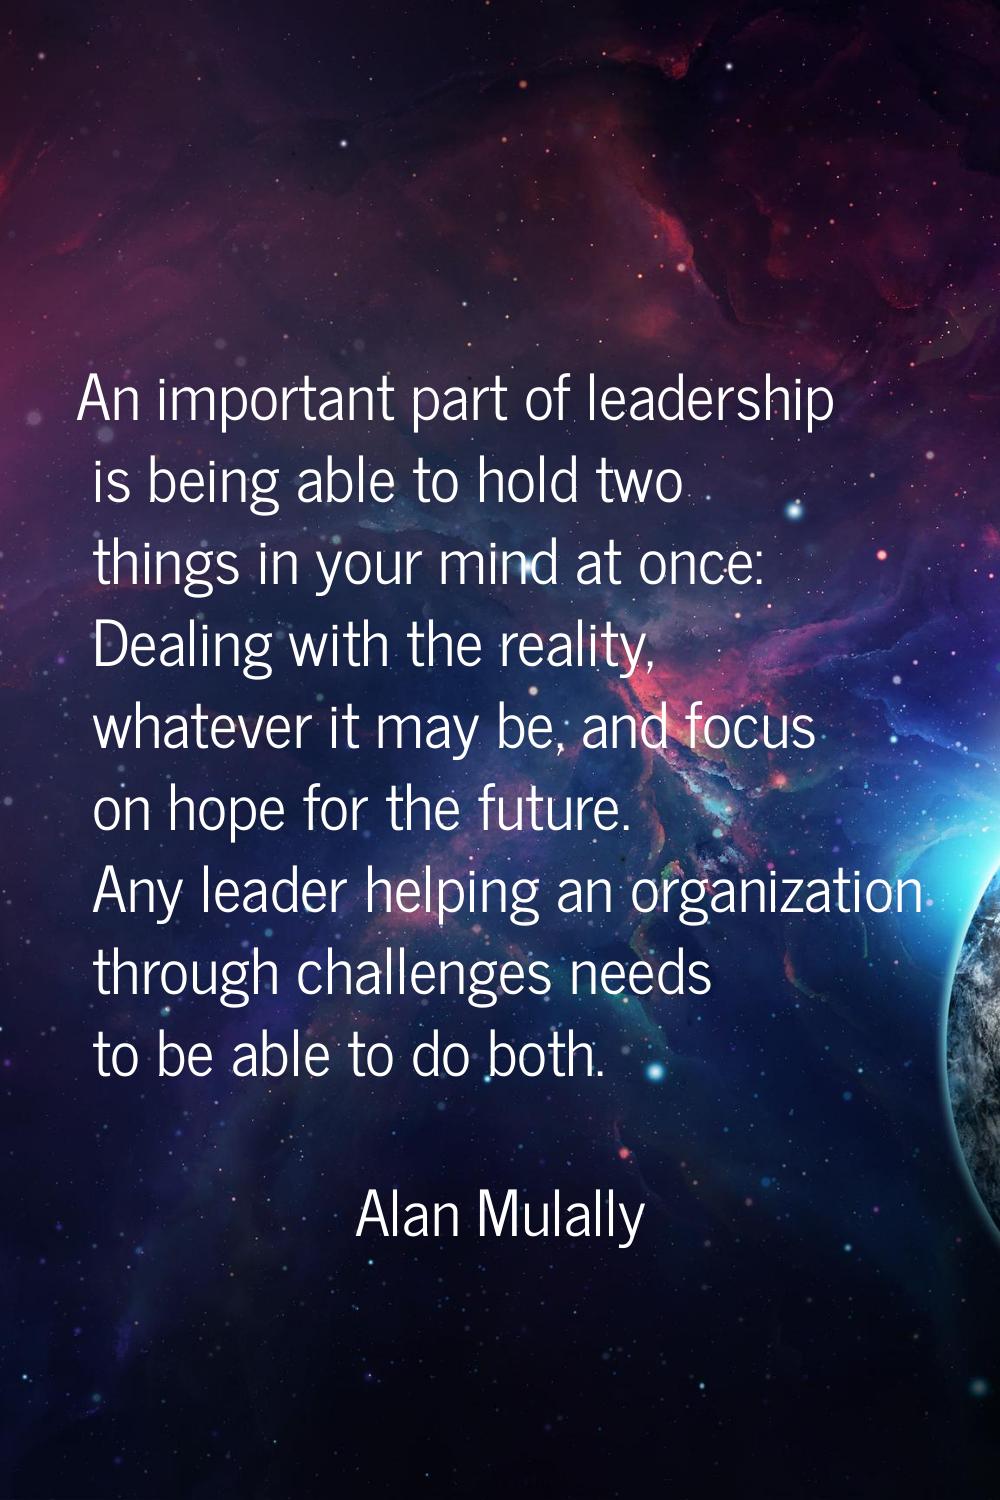 An important part of leadership is being able to hold two things in your mind at once: Dealing with